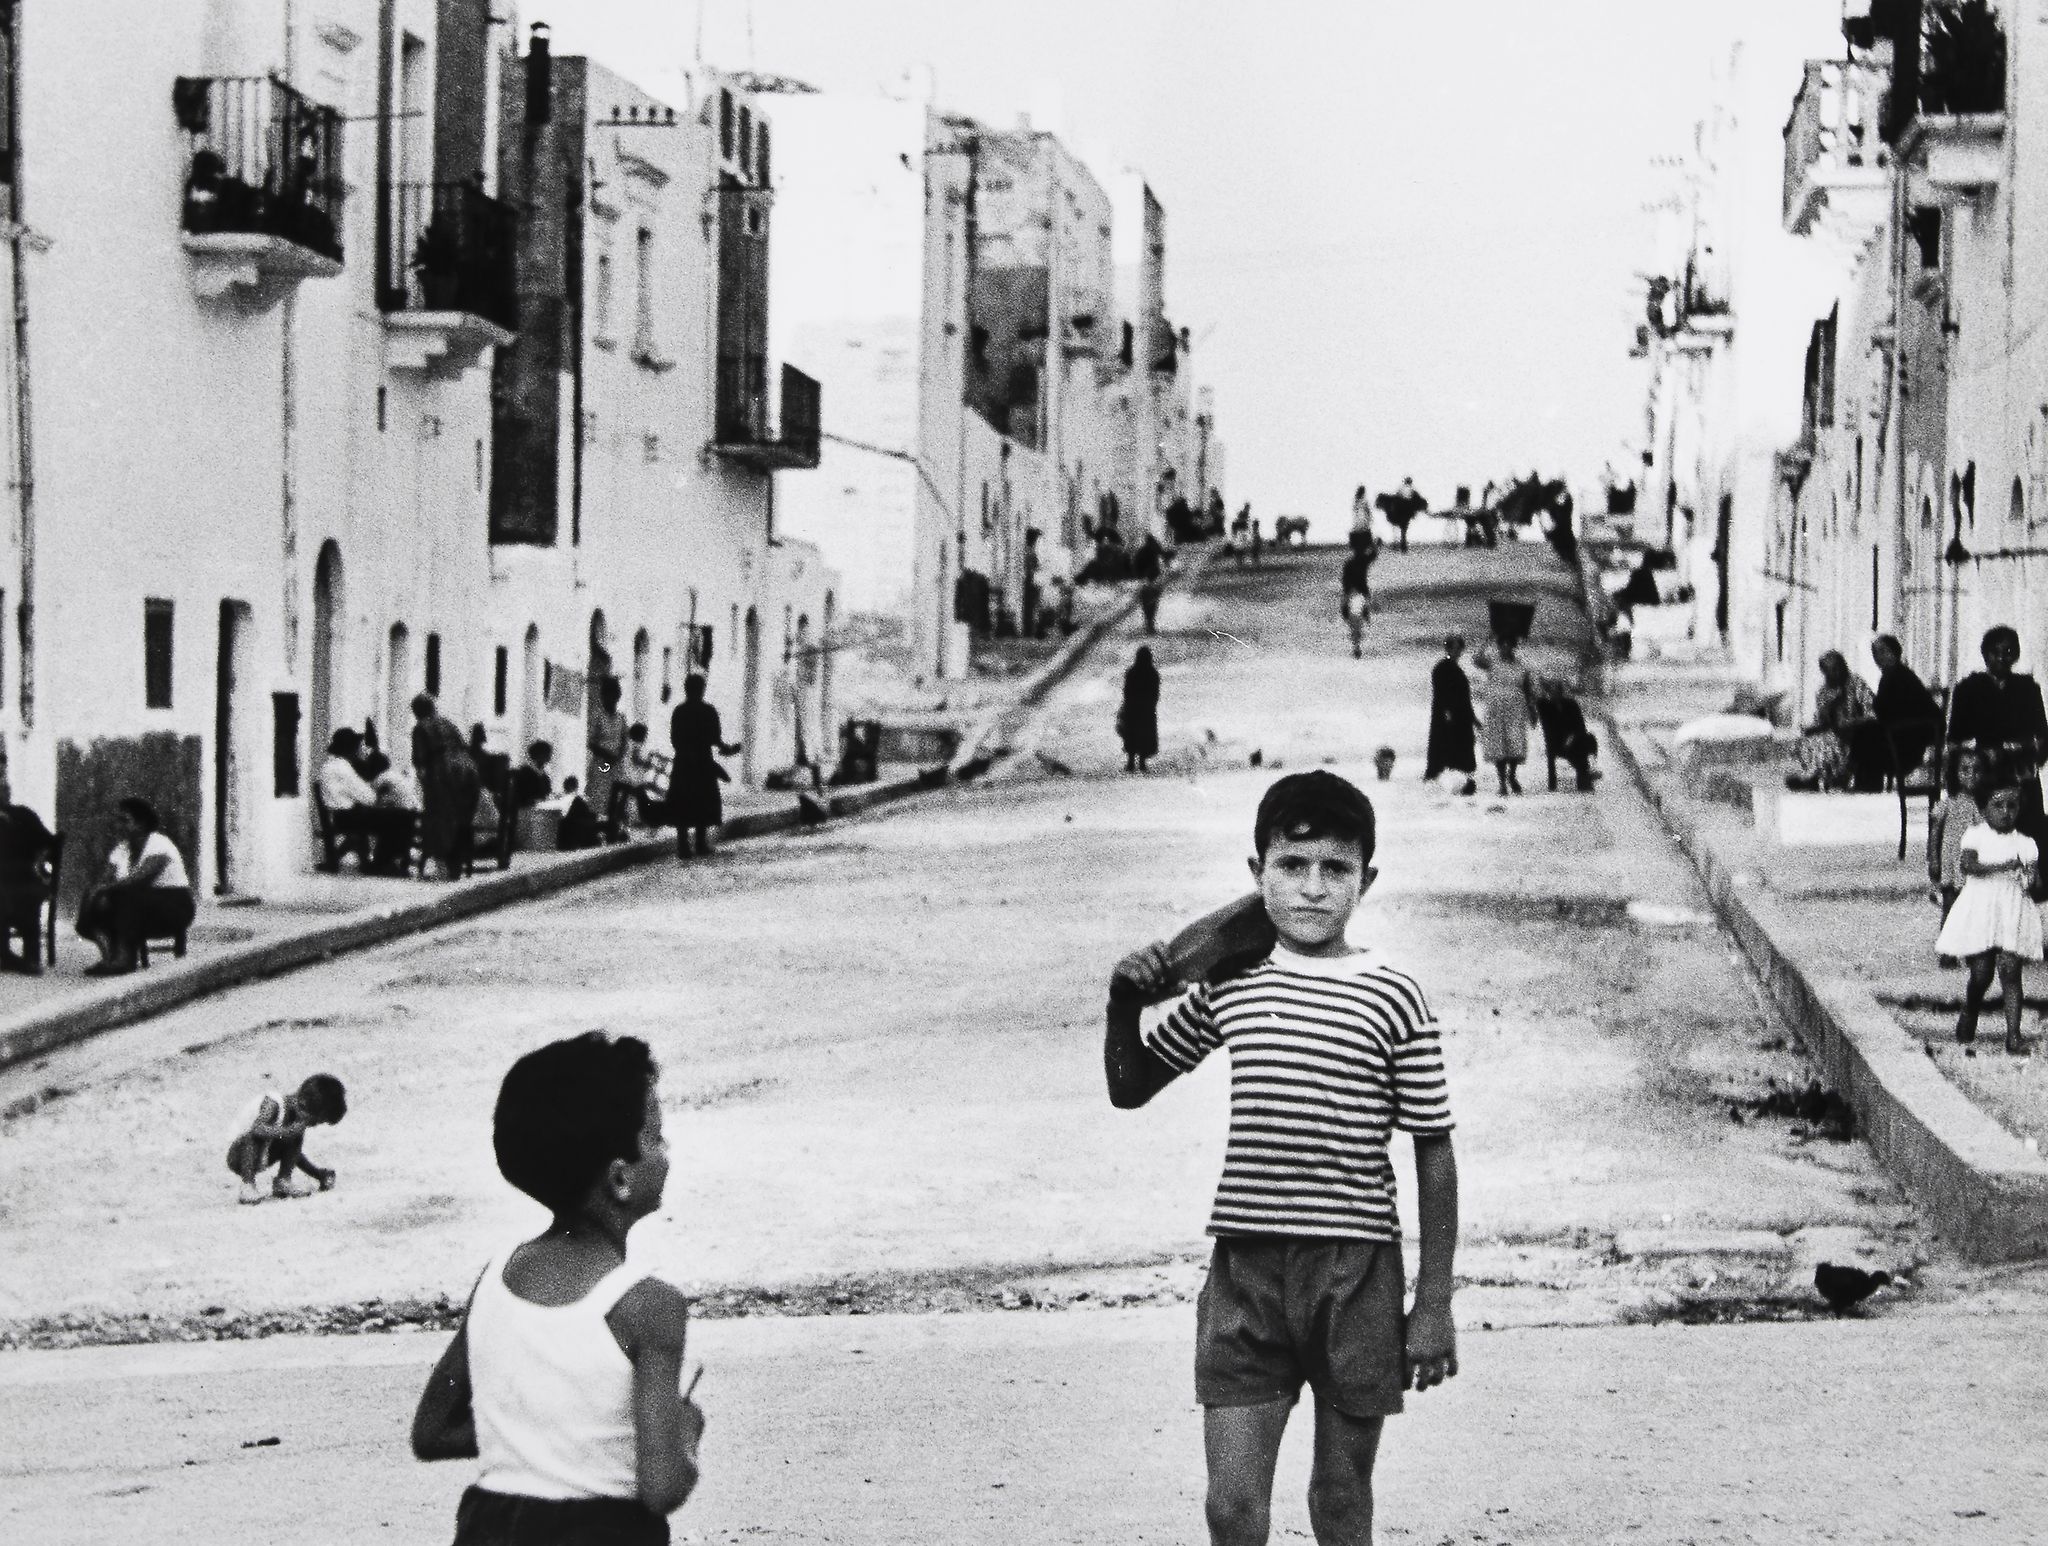 Mario Giacomelli (1925-2000) - Untitled, from the series 'Puglia', 1958  Gelatin silver print on